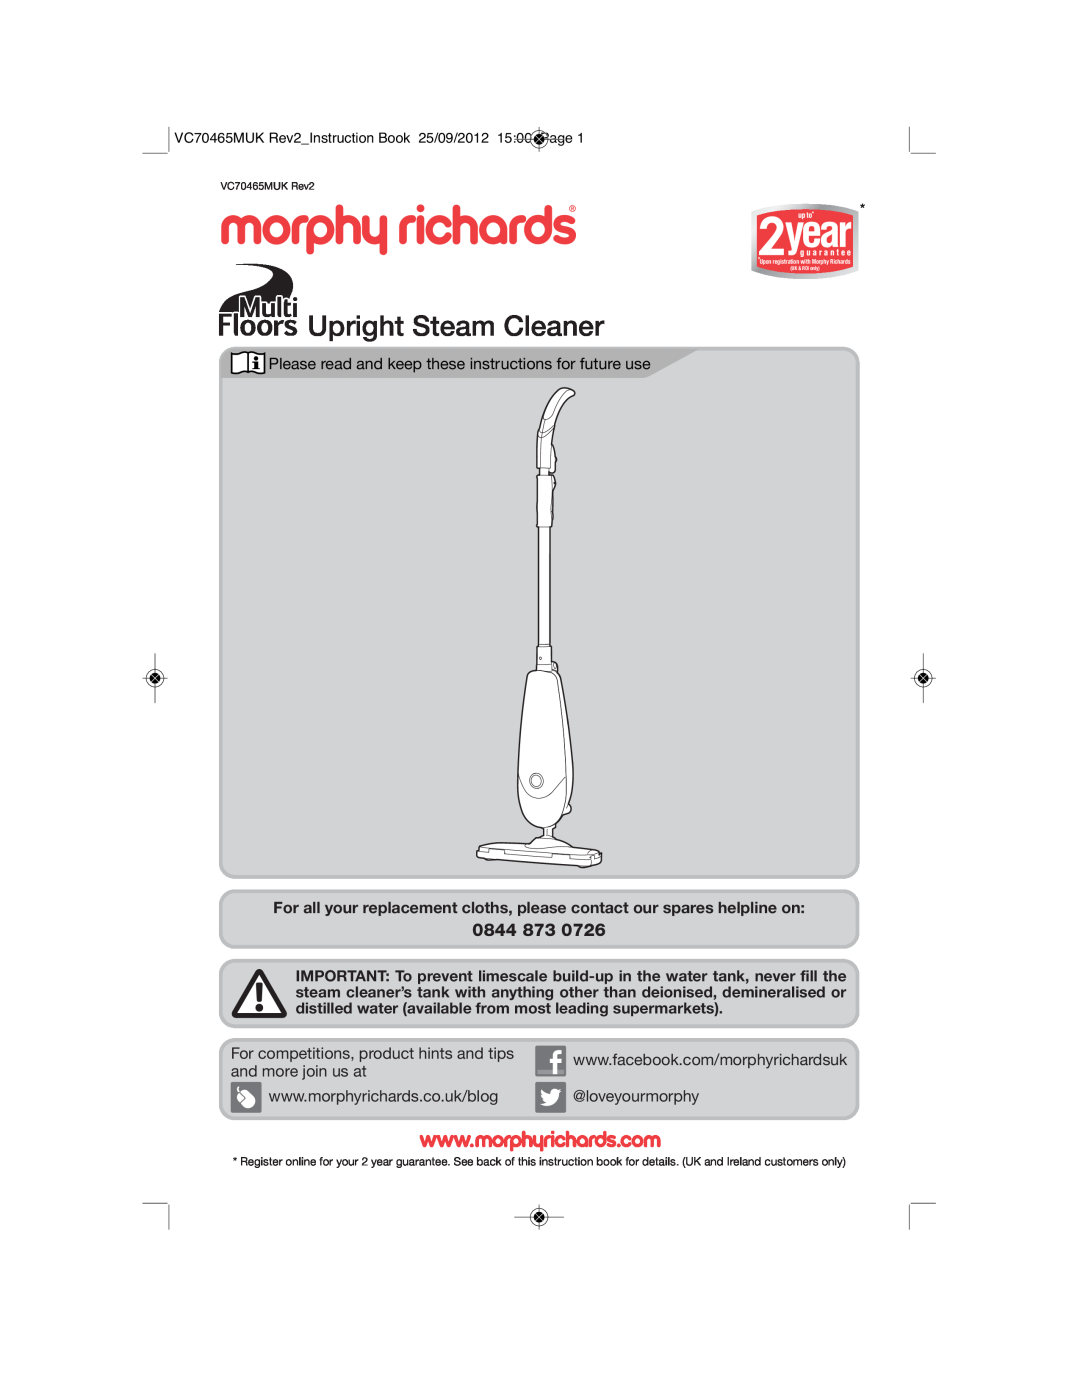 Morphy Richards VC70465MUK manual Upright Steam Cleaner, 0844 873, Please read and keep these instructions for future use 